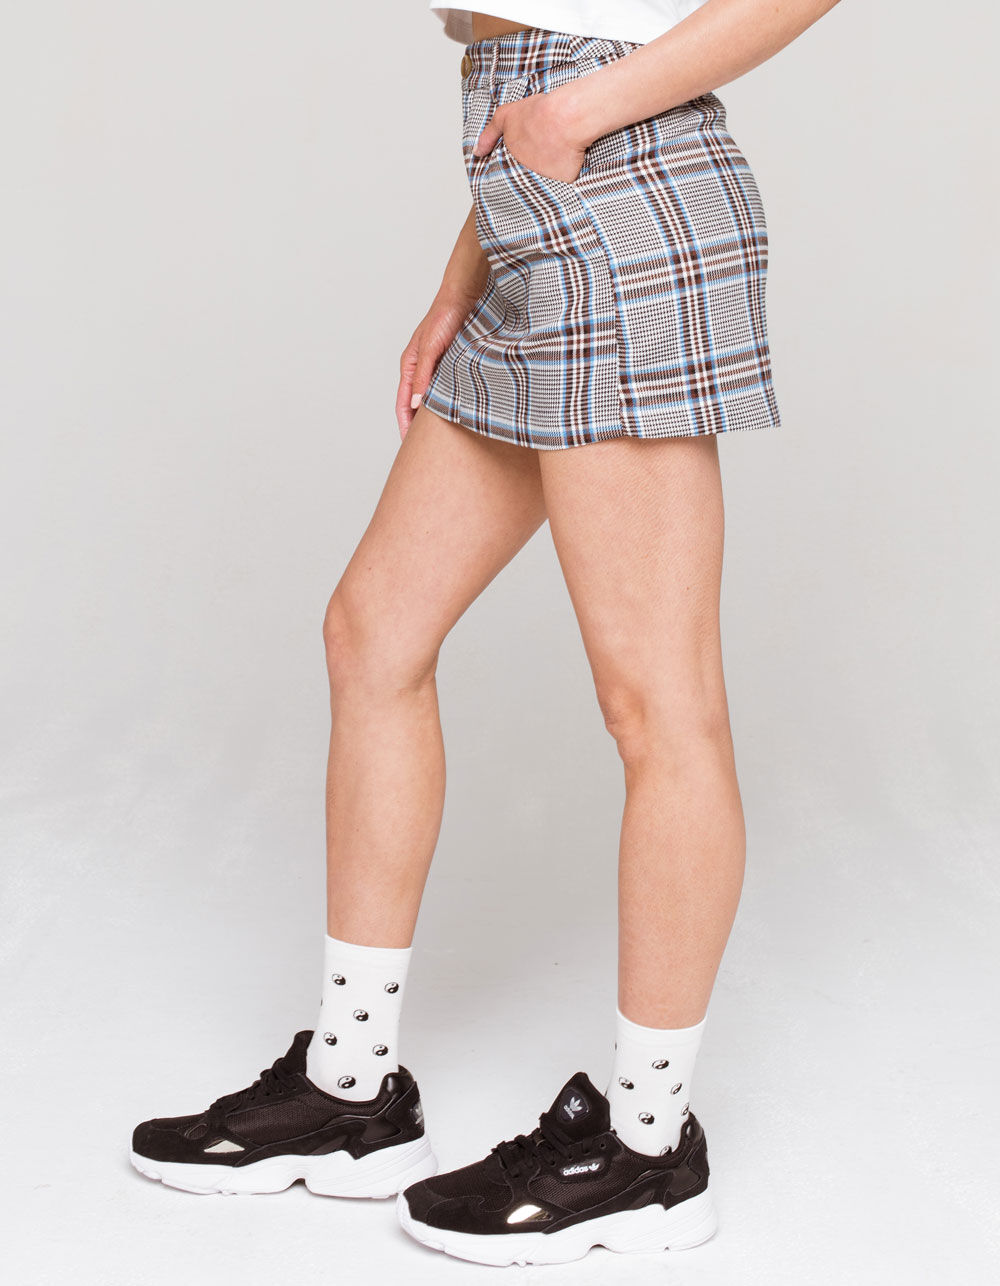 KNOW ONE CARES Plaid Houndstooth Skirt image number 1